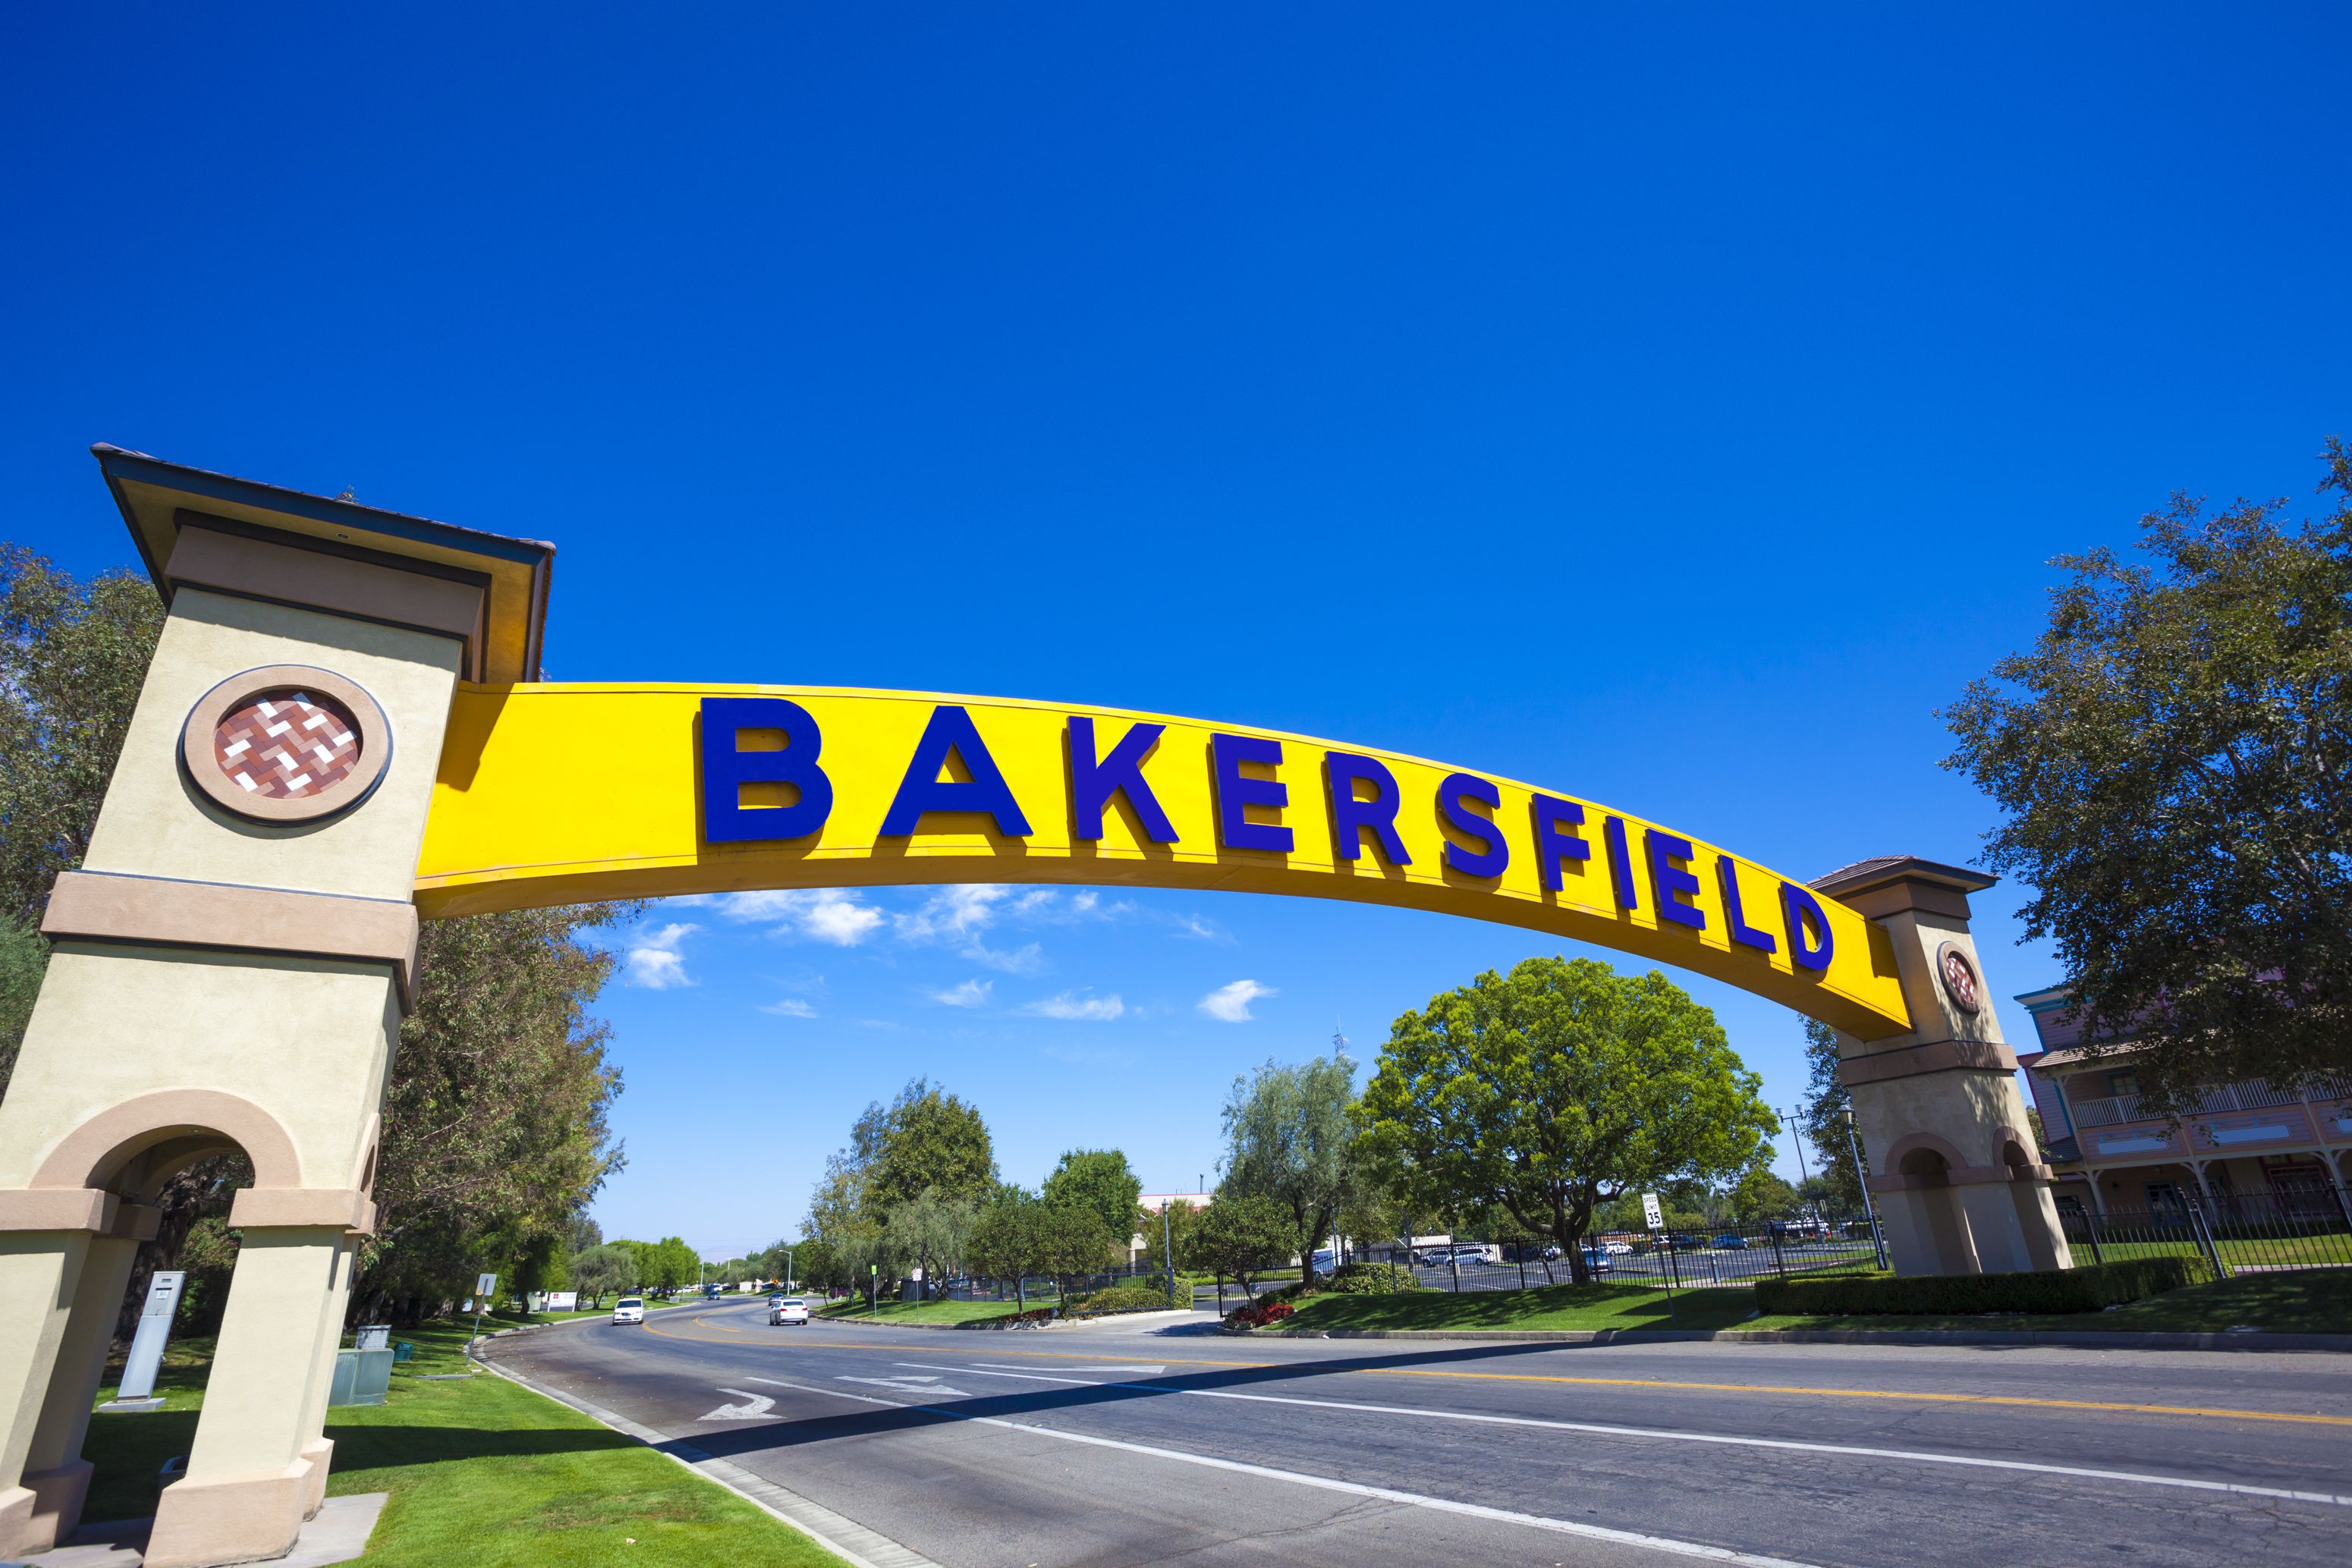 Things to Do in Bakersfield California: Beyond the Basics